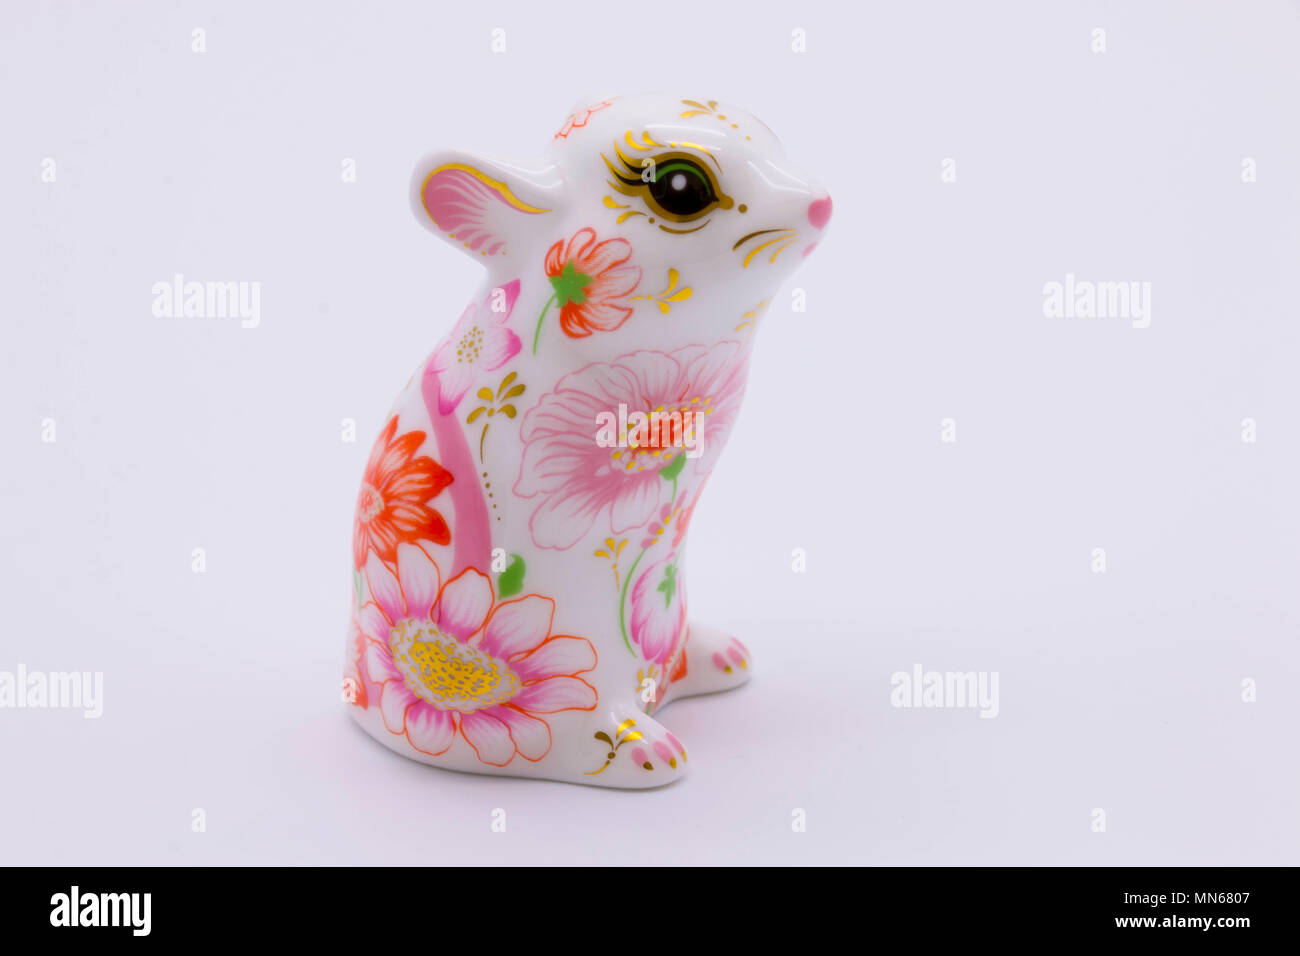 Royal Crown Derby bone china paperweight of a mouse uk Stock Photo